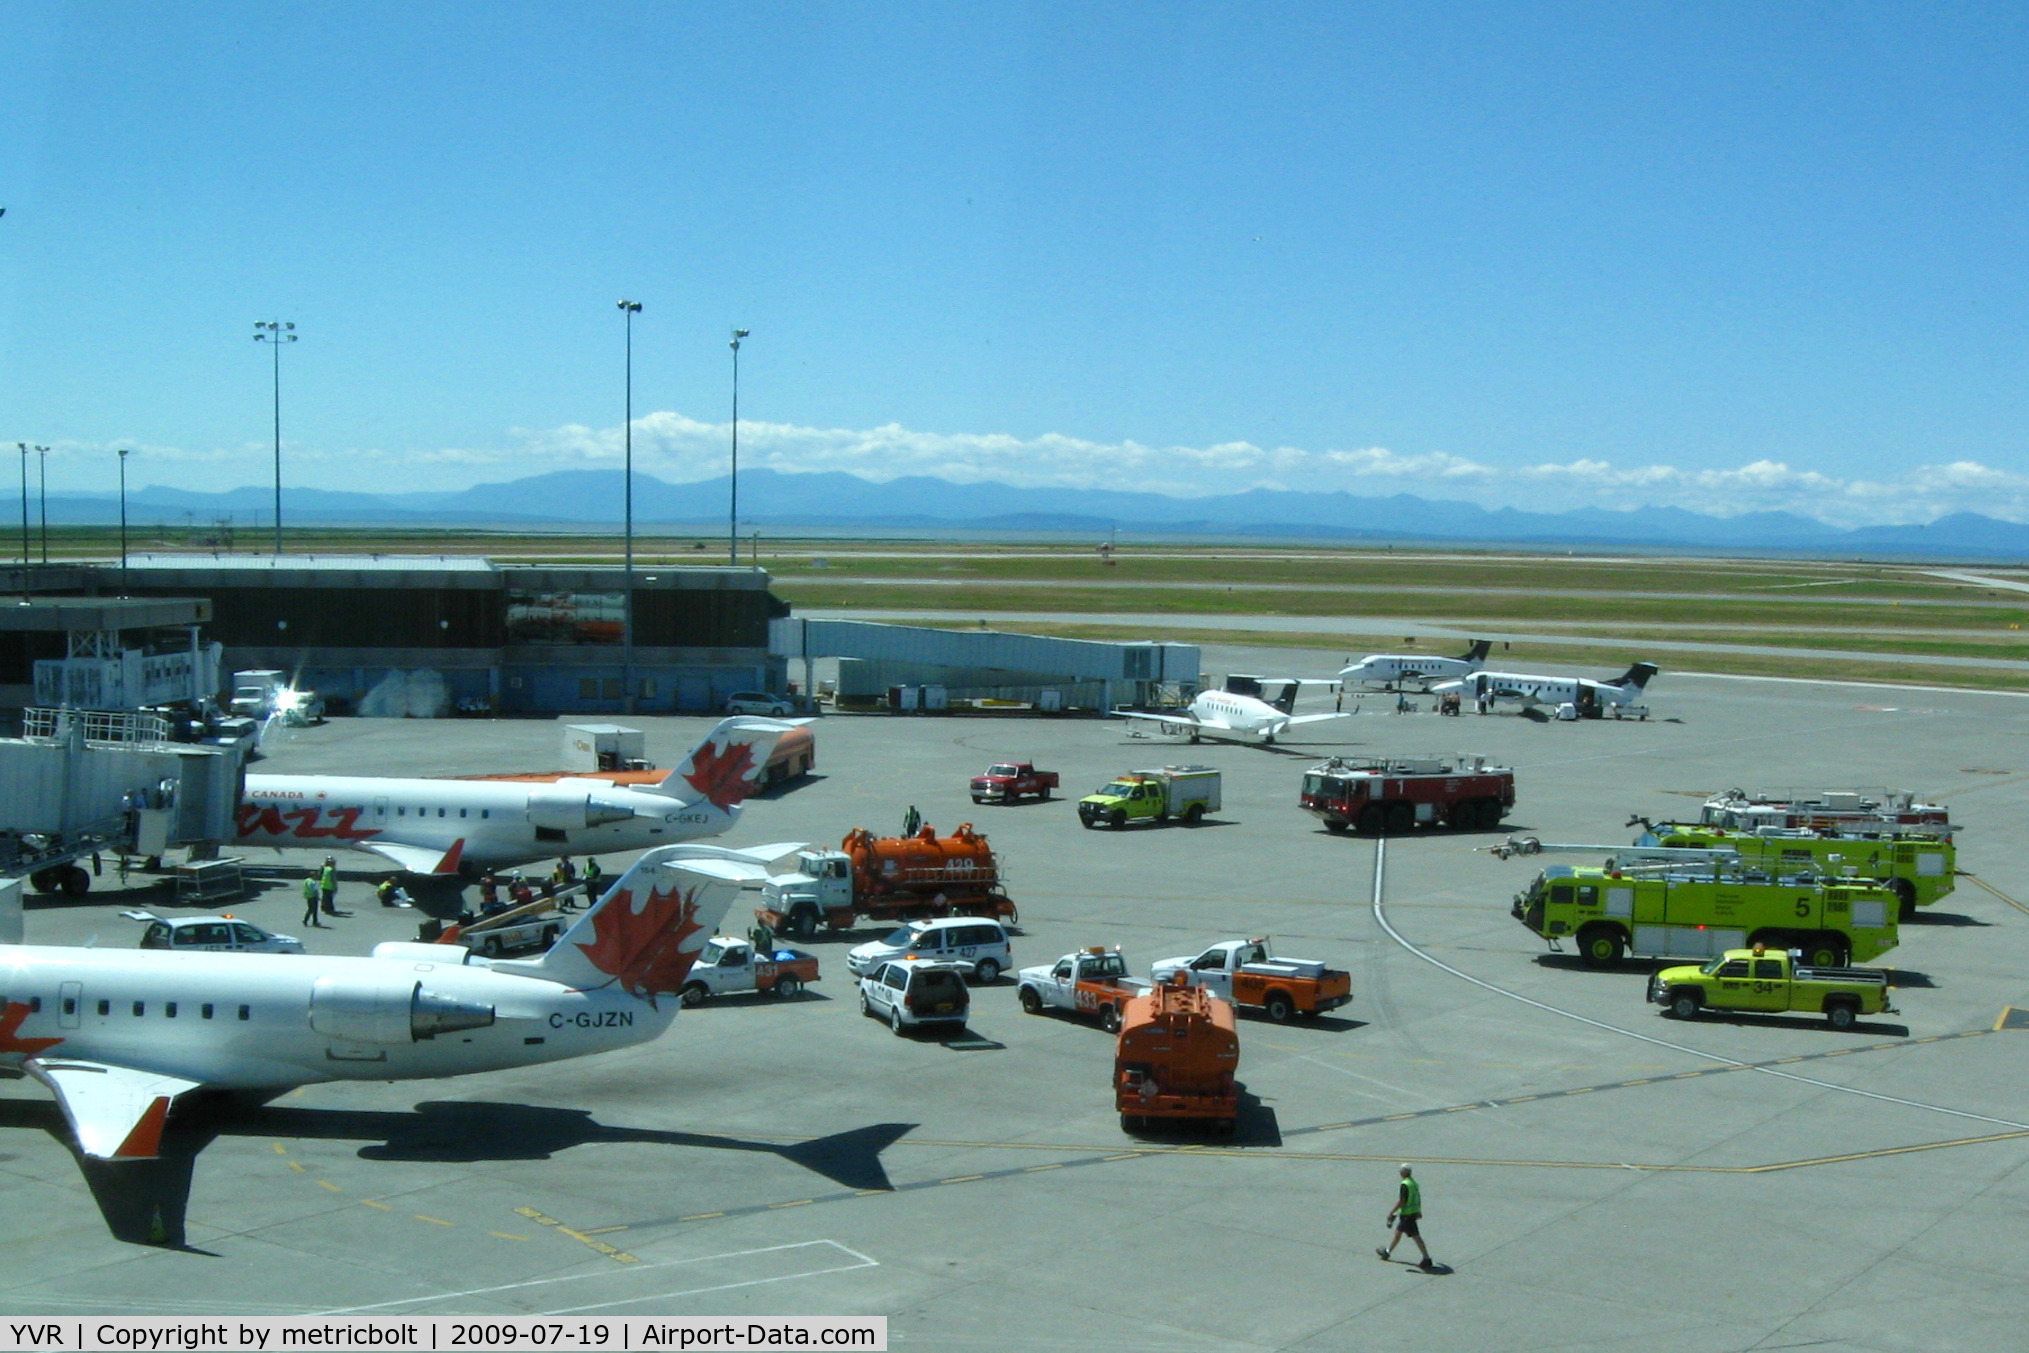 Vancouver International Airport, Vancouver, British Columbia Canada (YVR) - Fuel spill at YVR